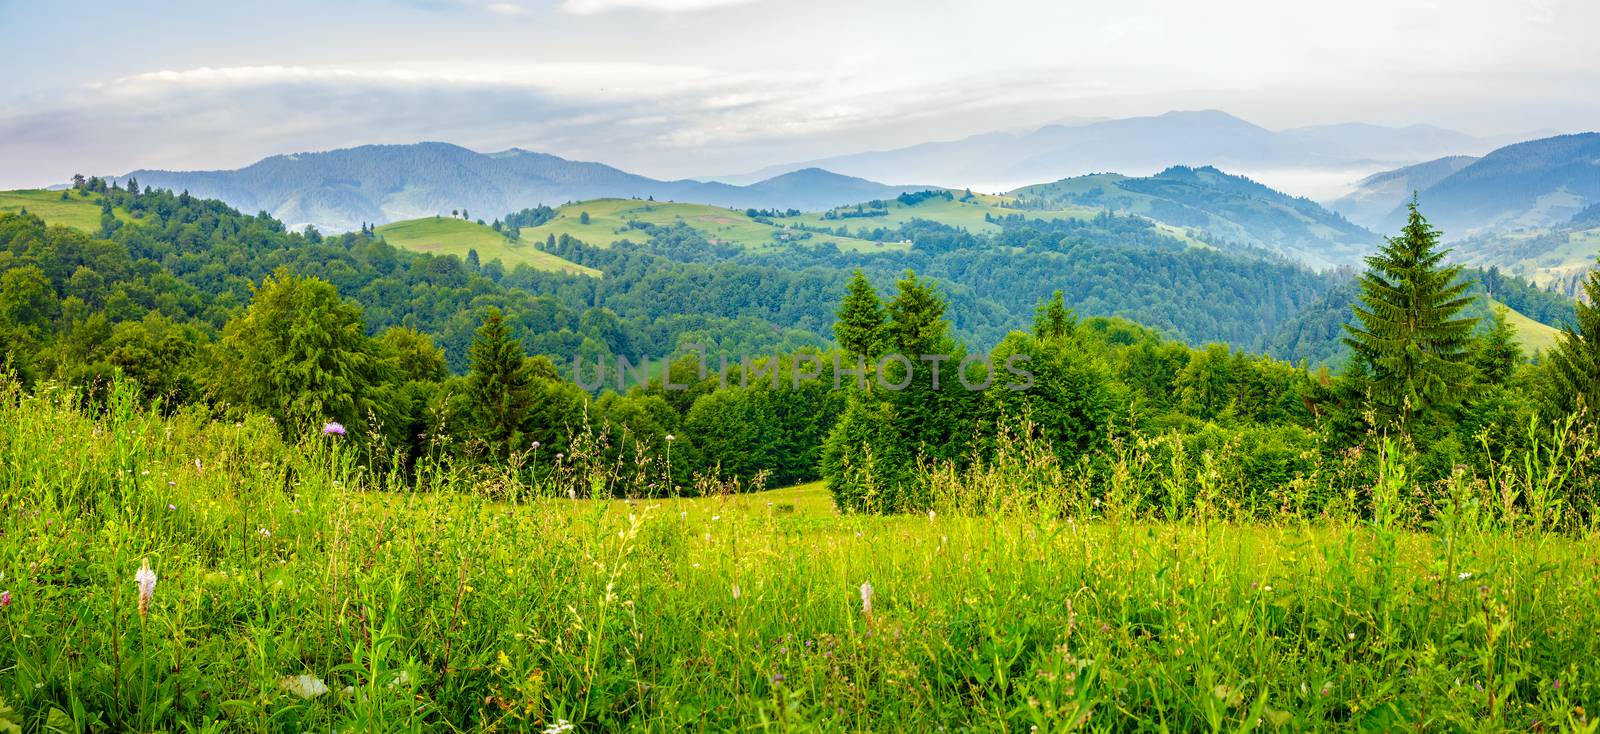 slope of mountain range with coniferous forest on a meadow